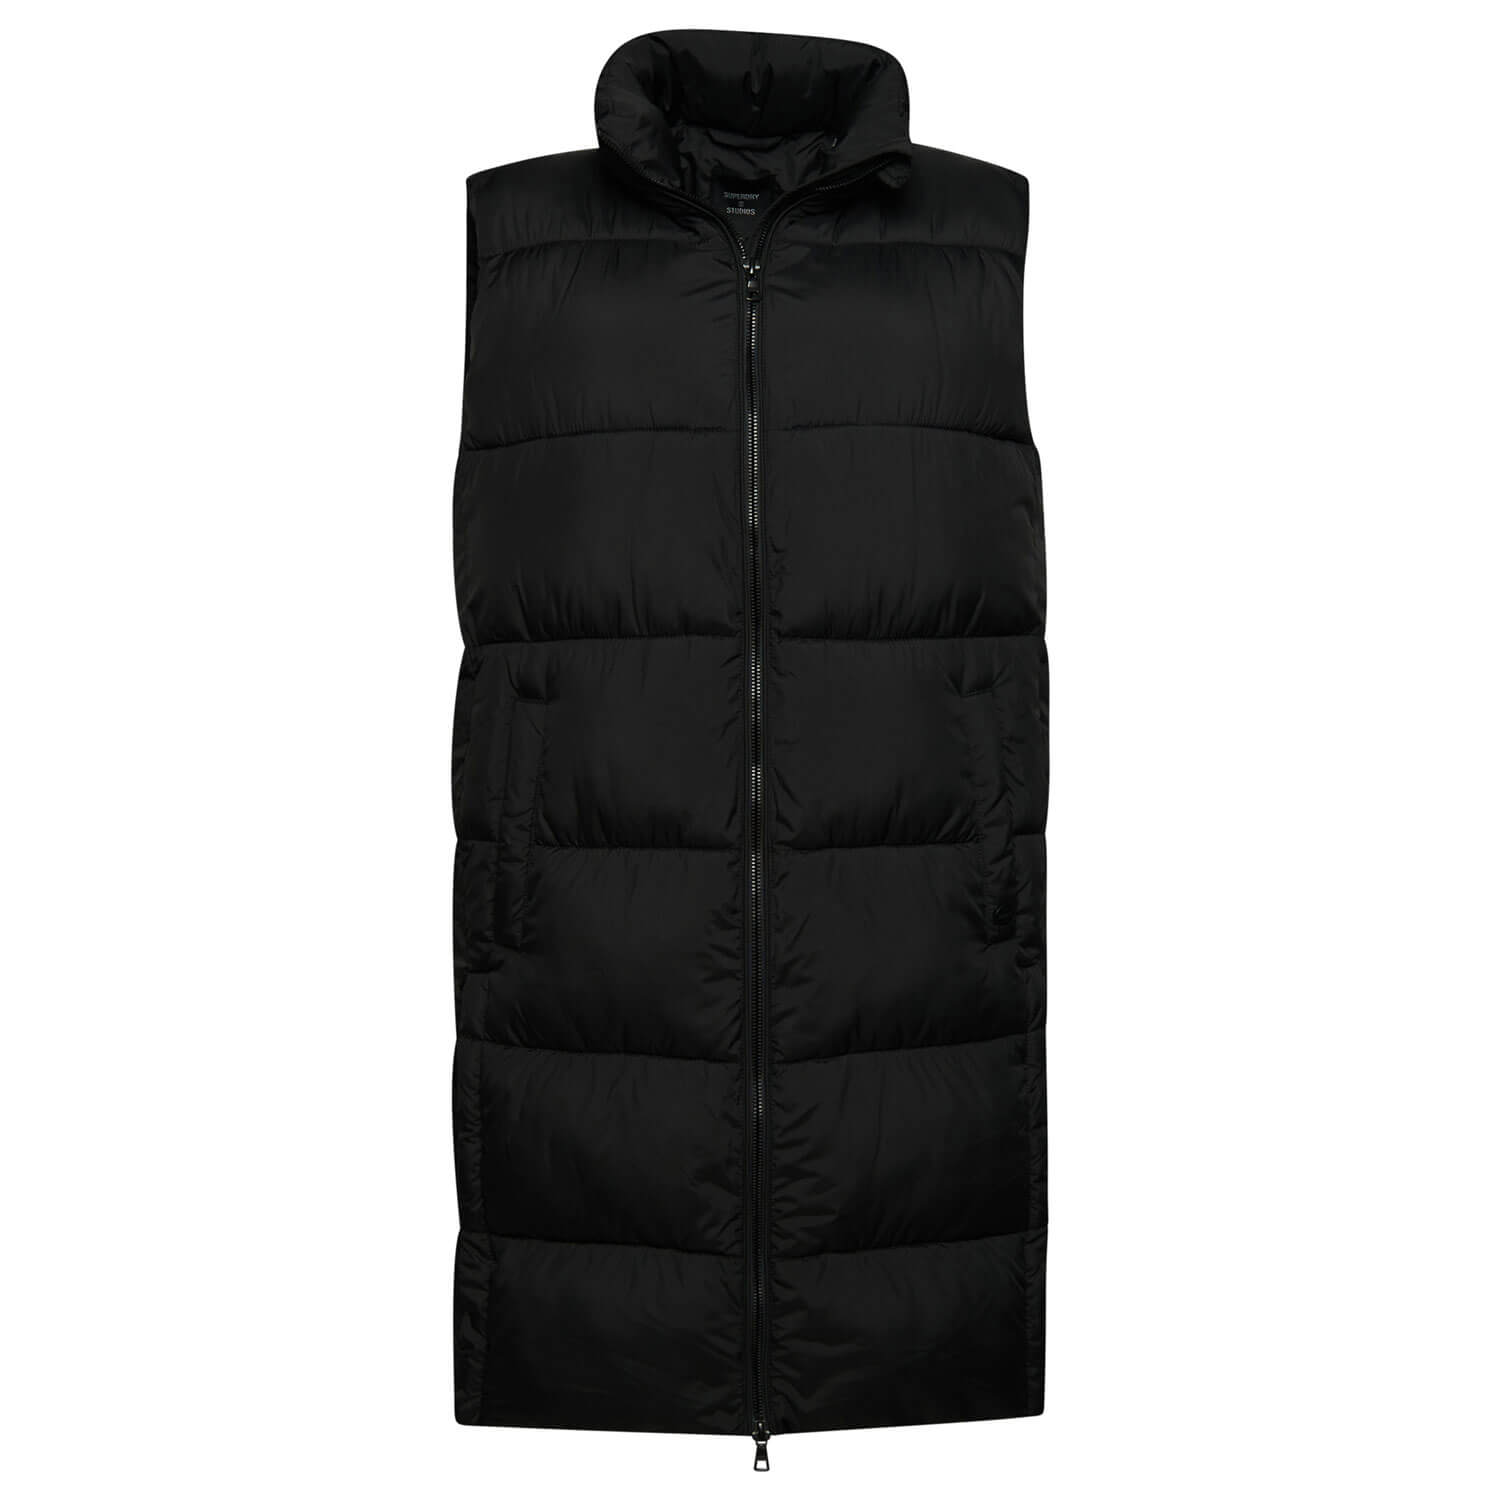 Superdry Longline Hooded Quilted Gilet - Black 7 Shaws Department Stores